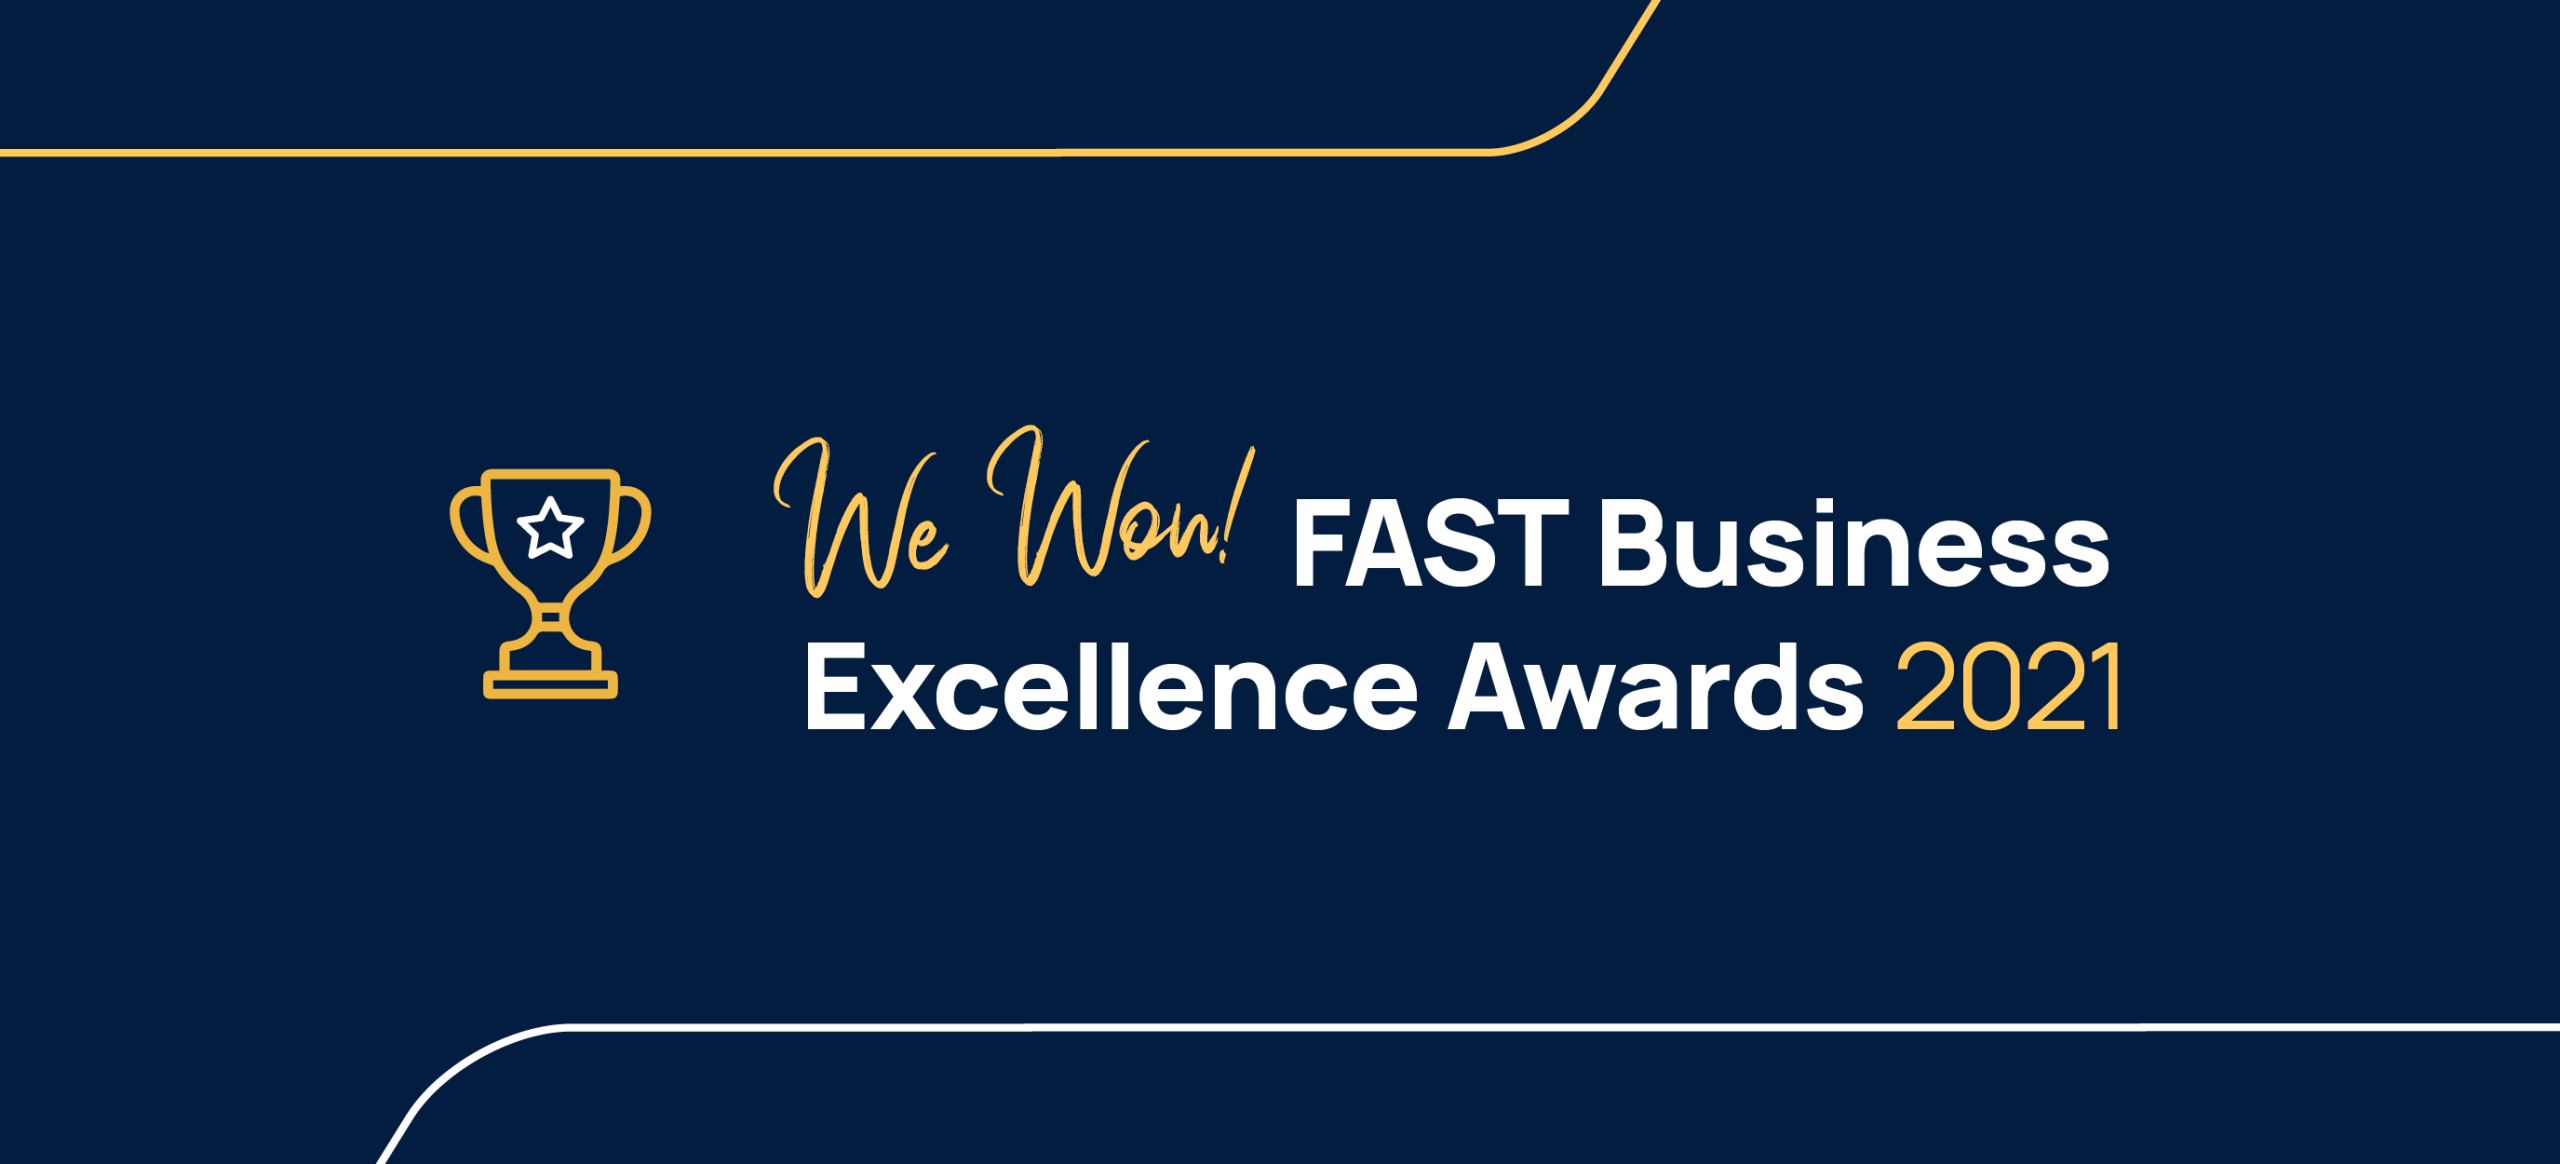 We Won! FAST Business Excellence Awards 2021